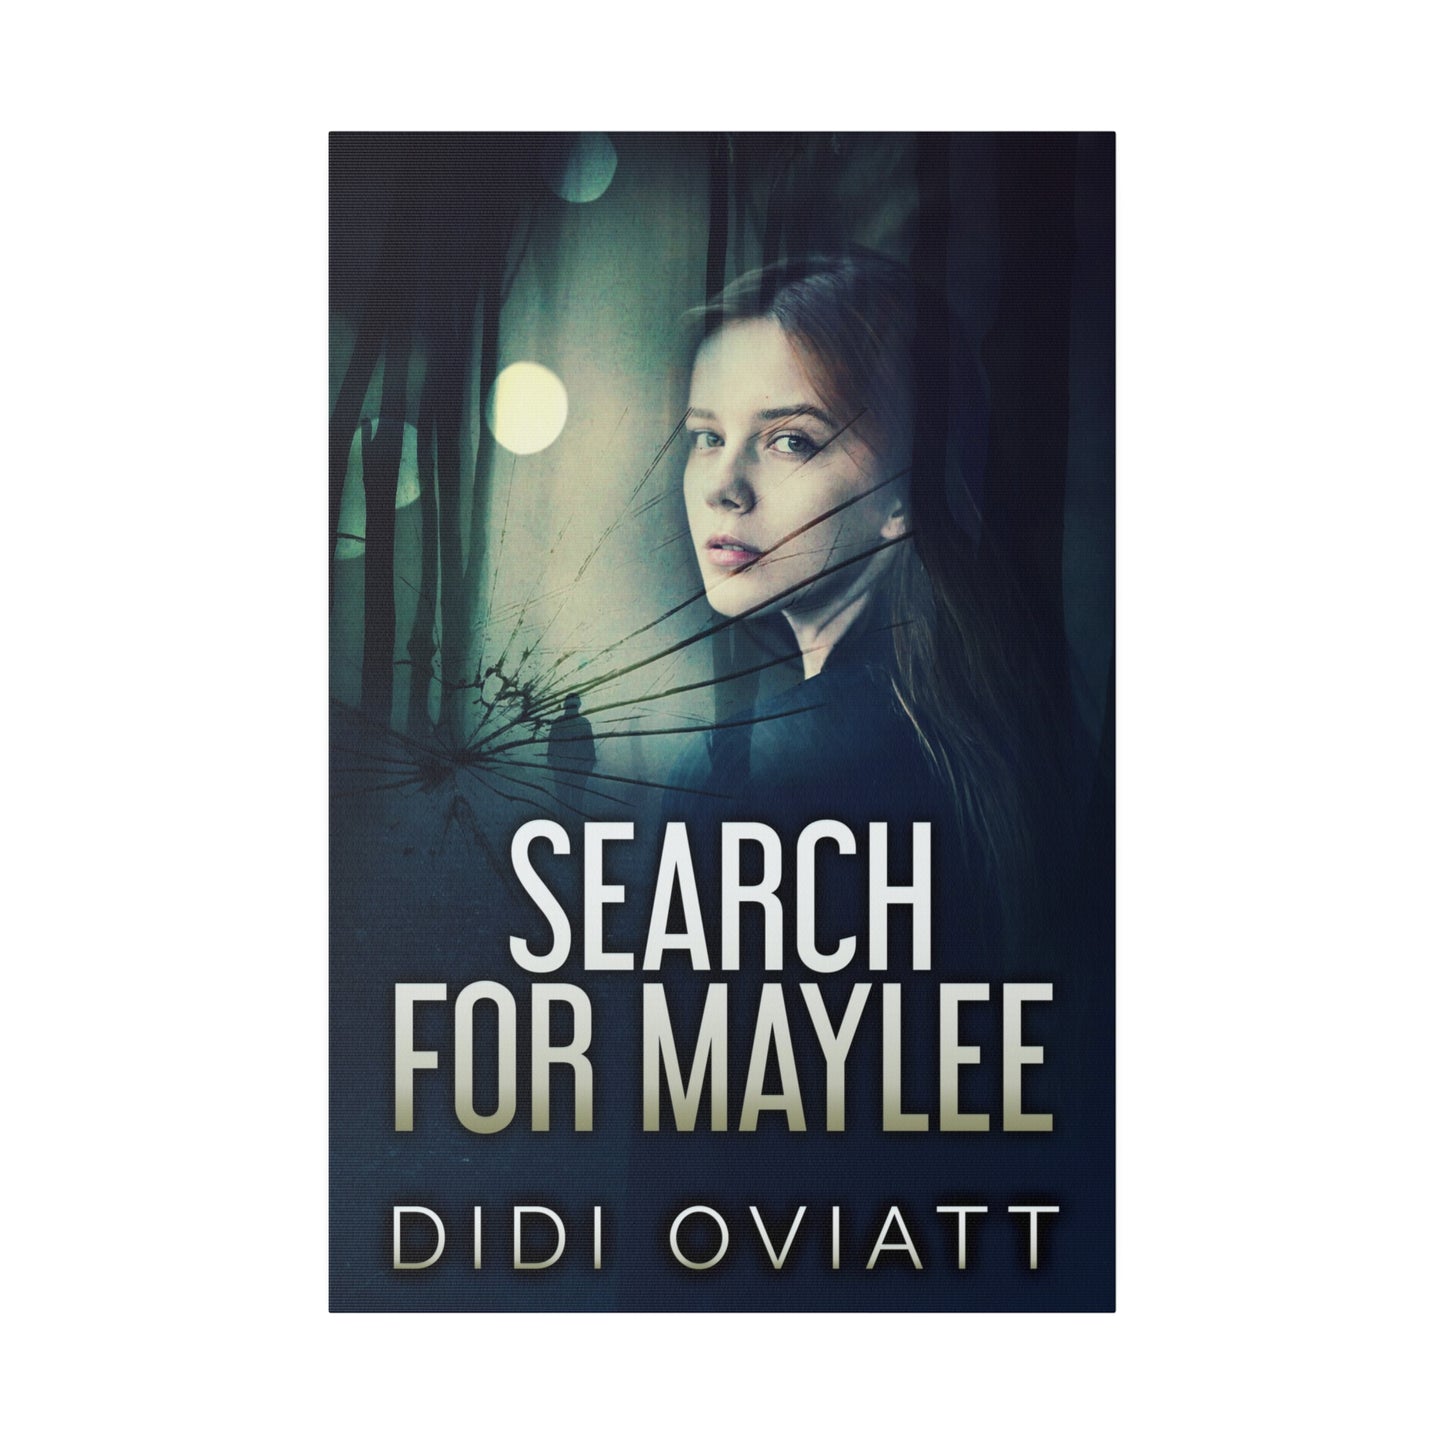 Search for Maylee - Canvas